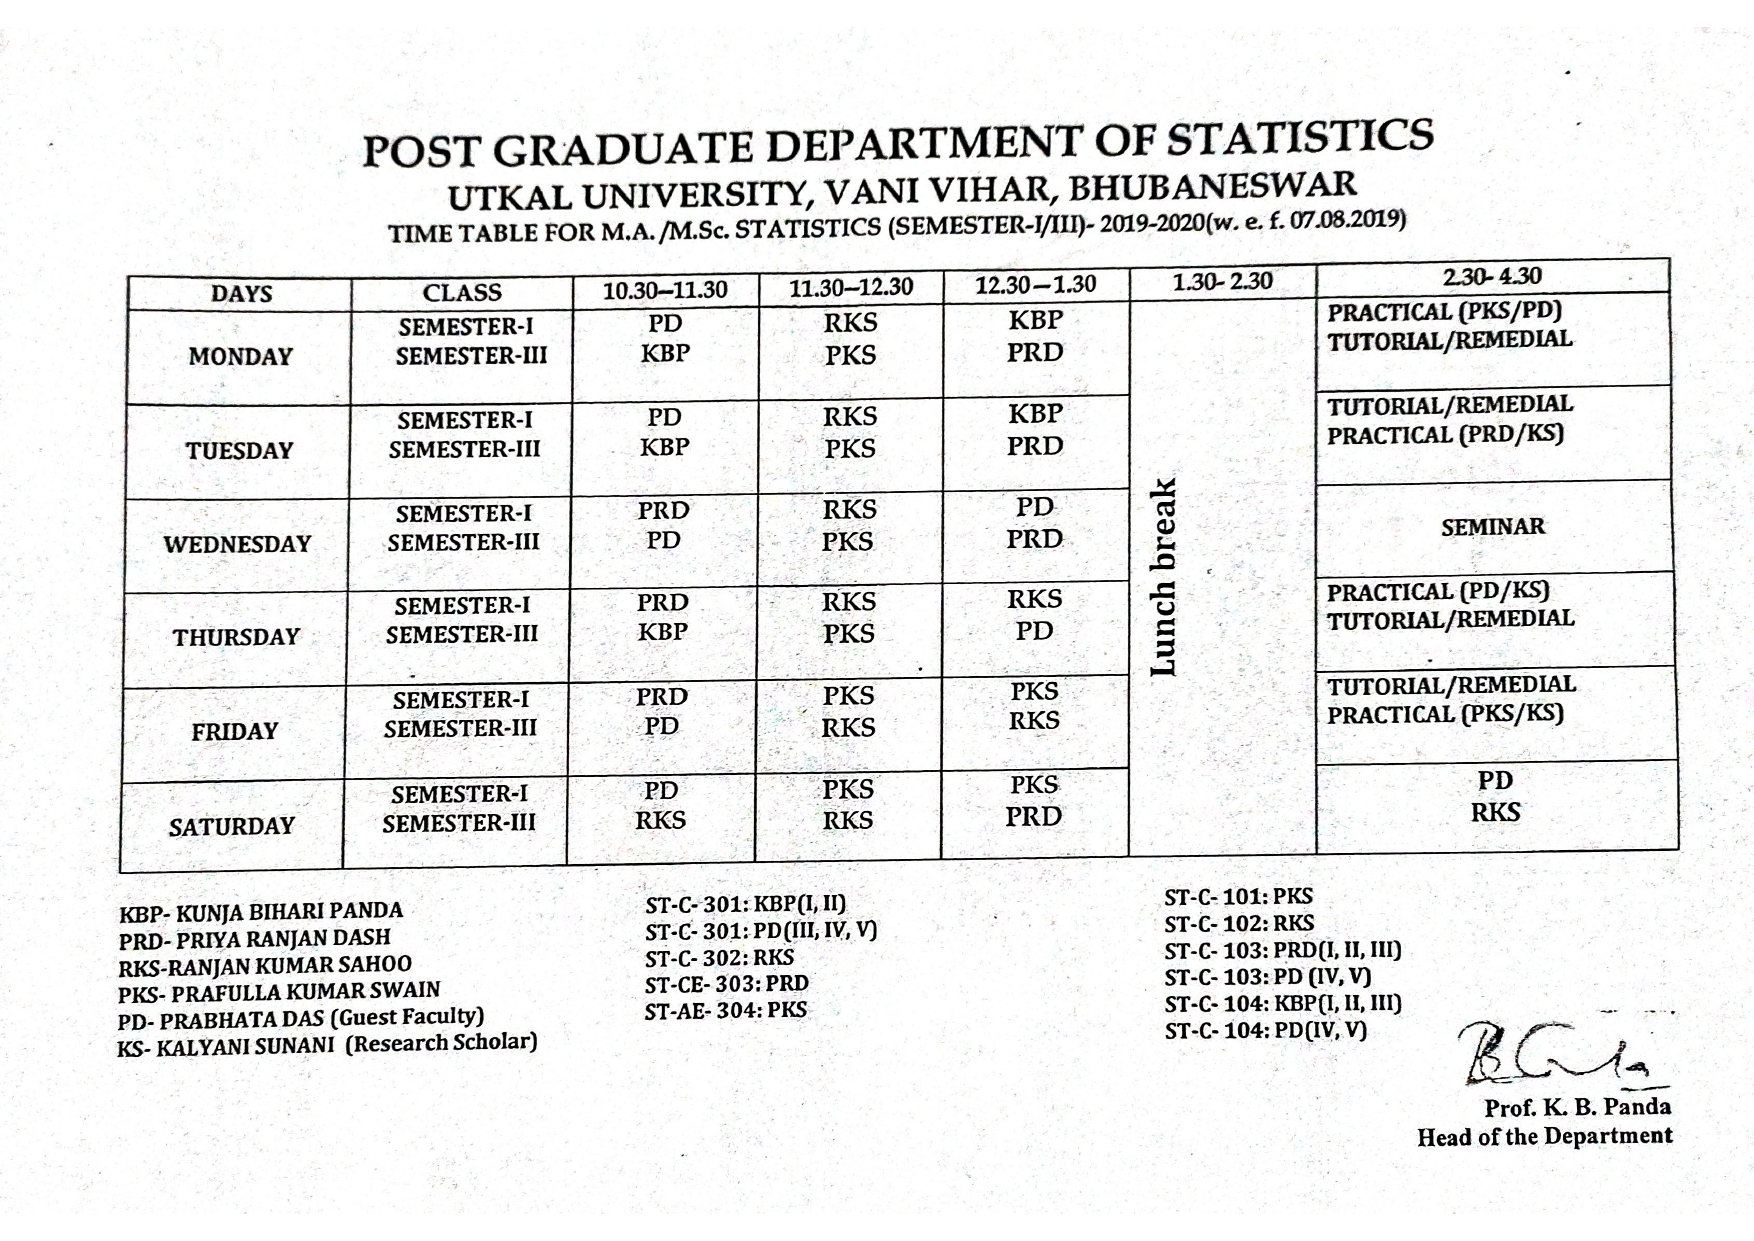 Time Table for M.A. M.Sc 1st & 3rd Sem 2019-20